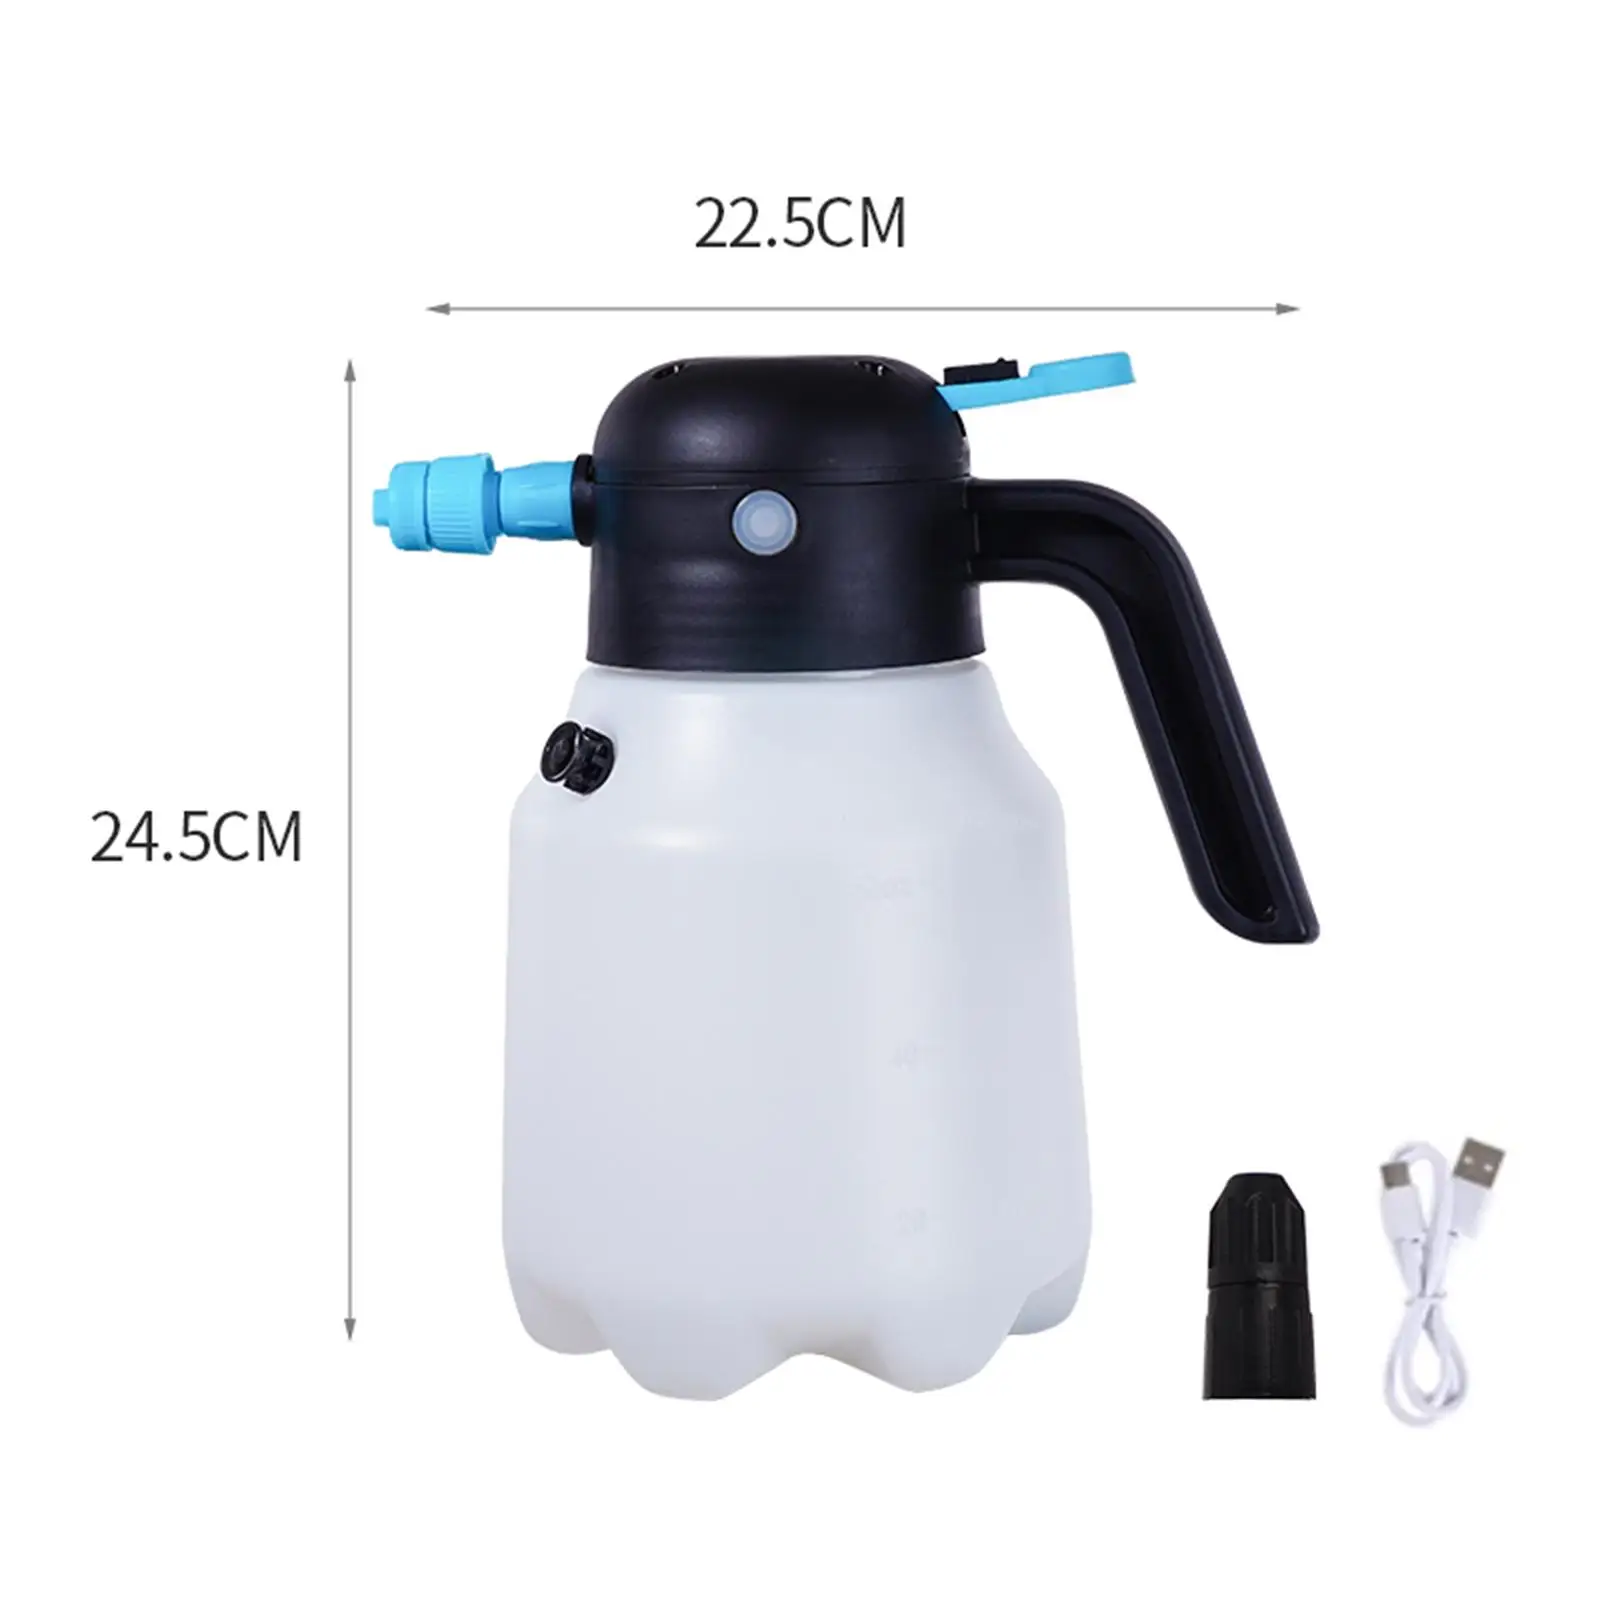 

1.8L Electric Car Foam Sprayer Electric Car Wash Foam Watering Can for Auto Detailing Gardening Watering Plants Window Cleaning